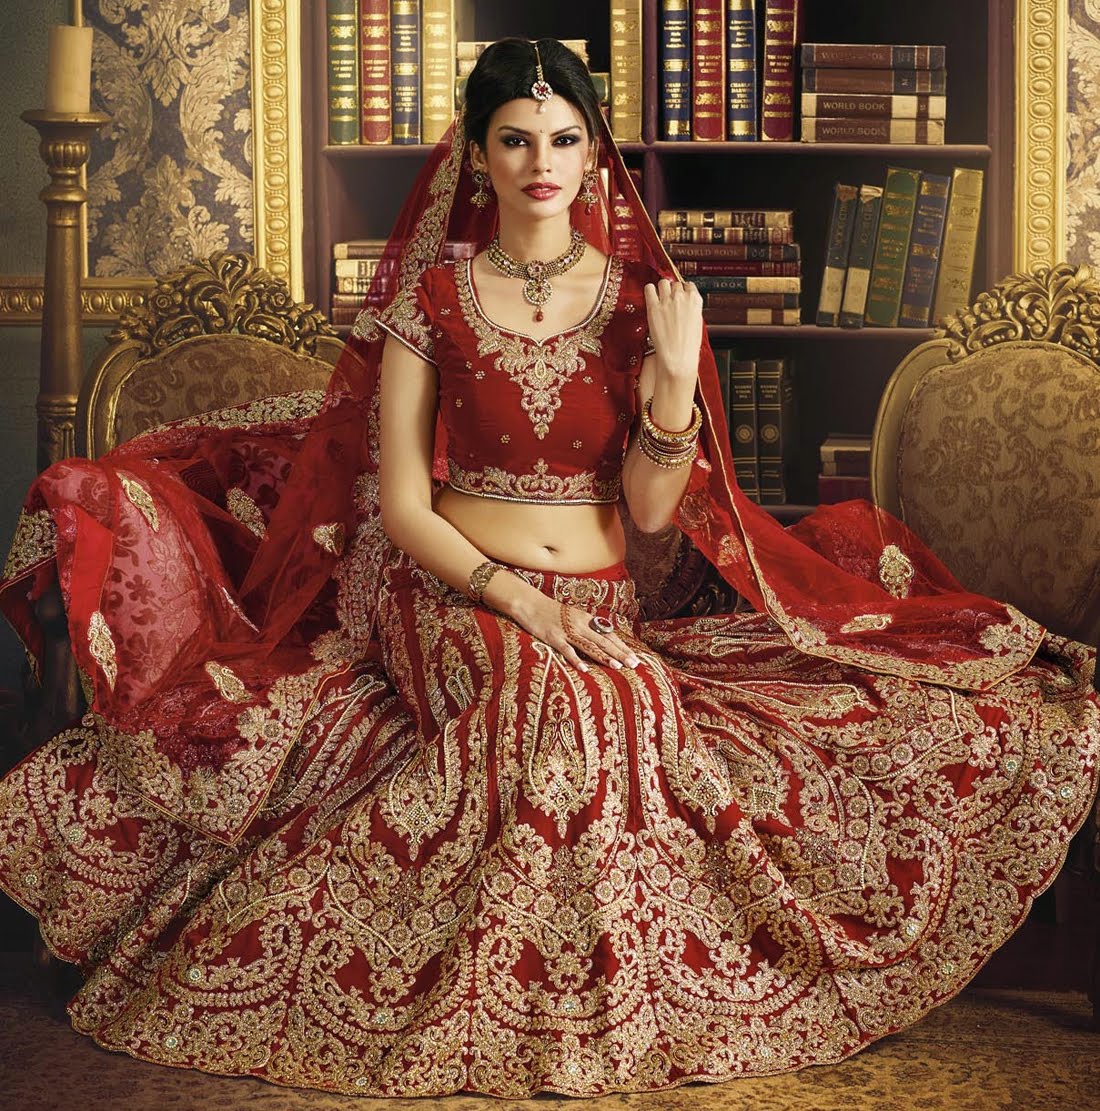 8 Fabulous Ways To Wear Your Bridal Lehenga Again, by Om Grover